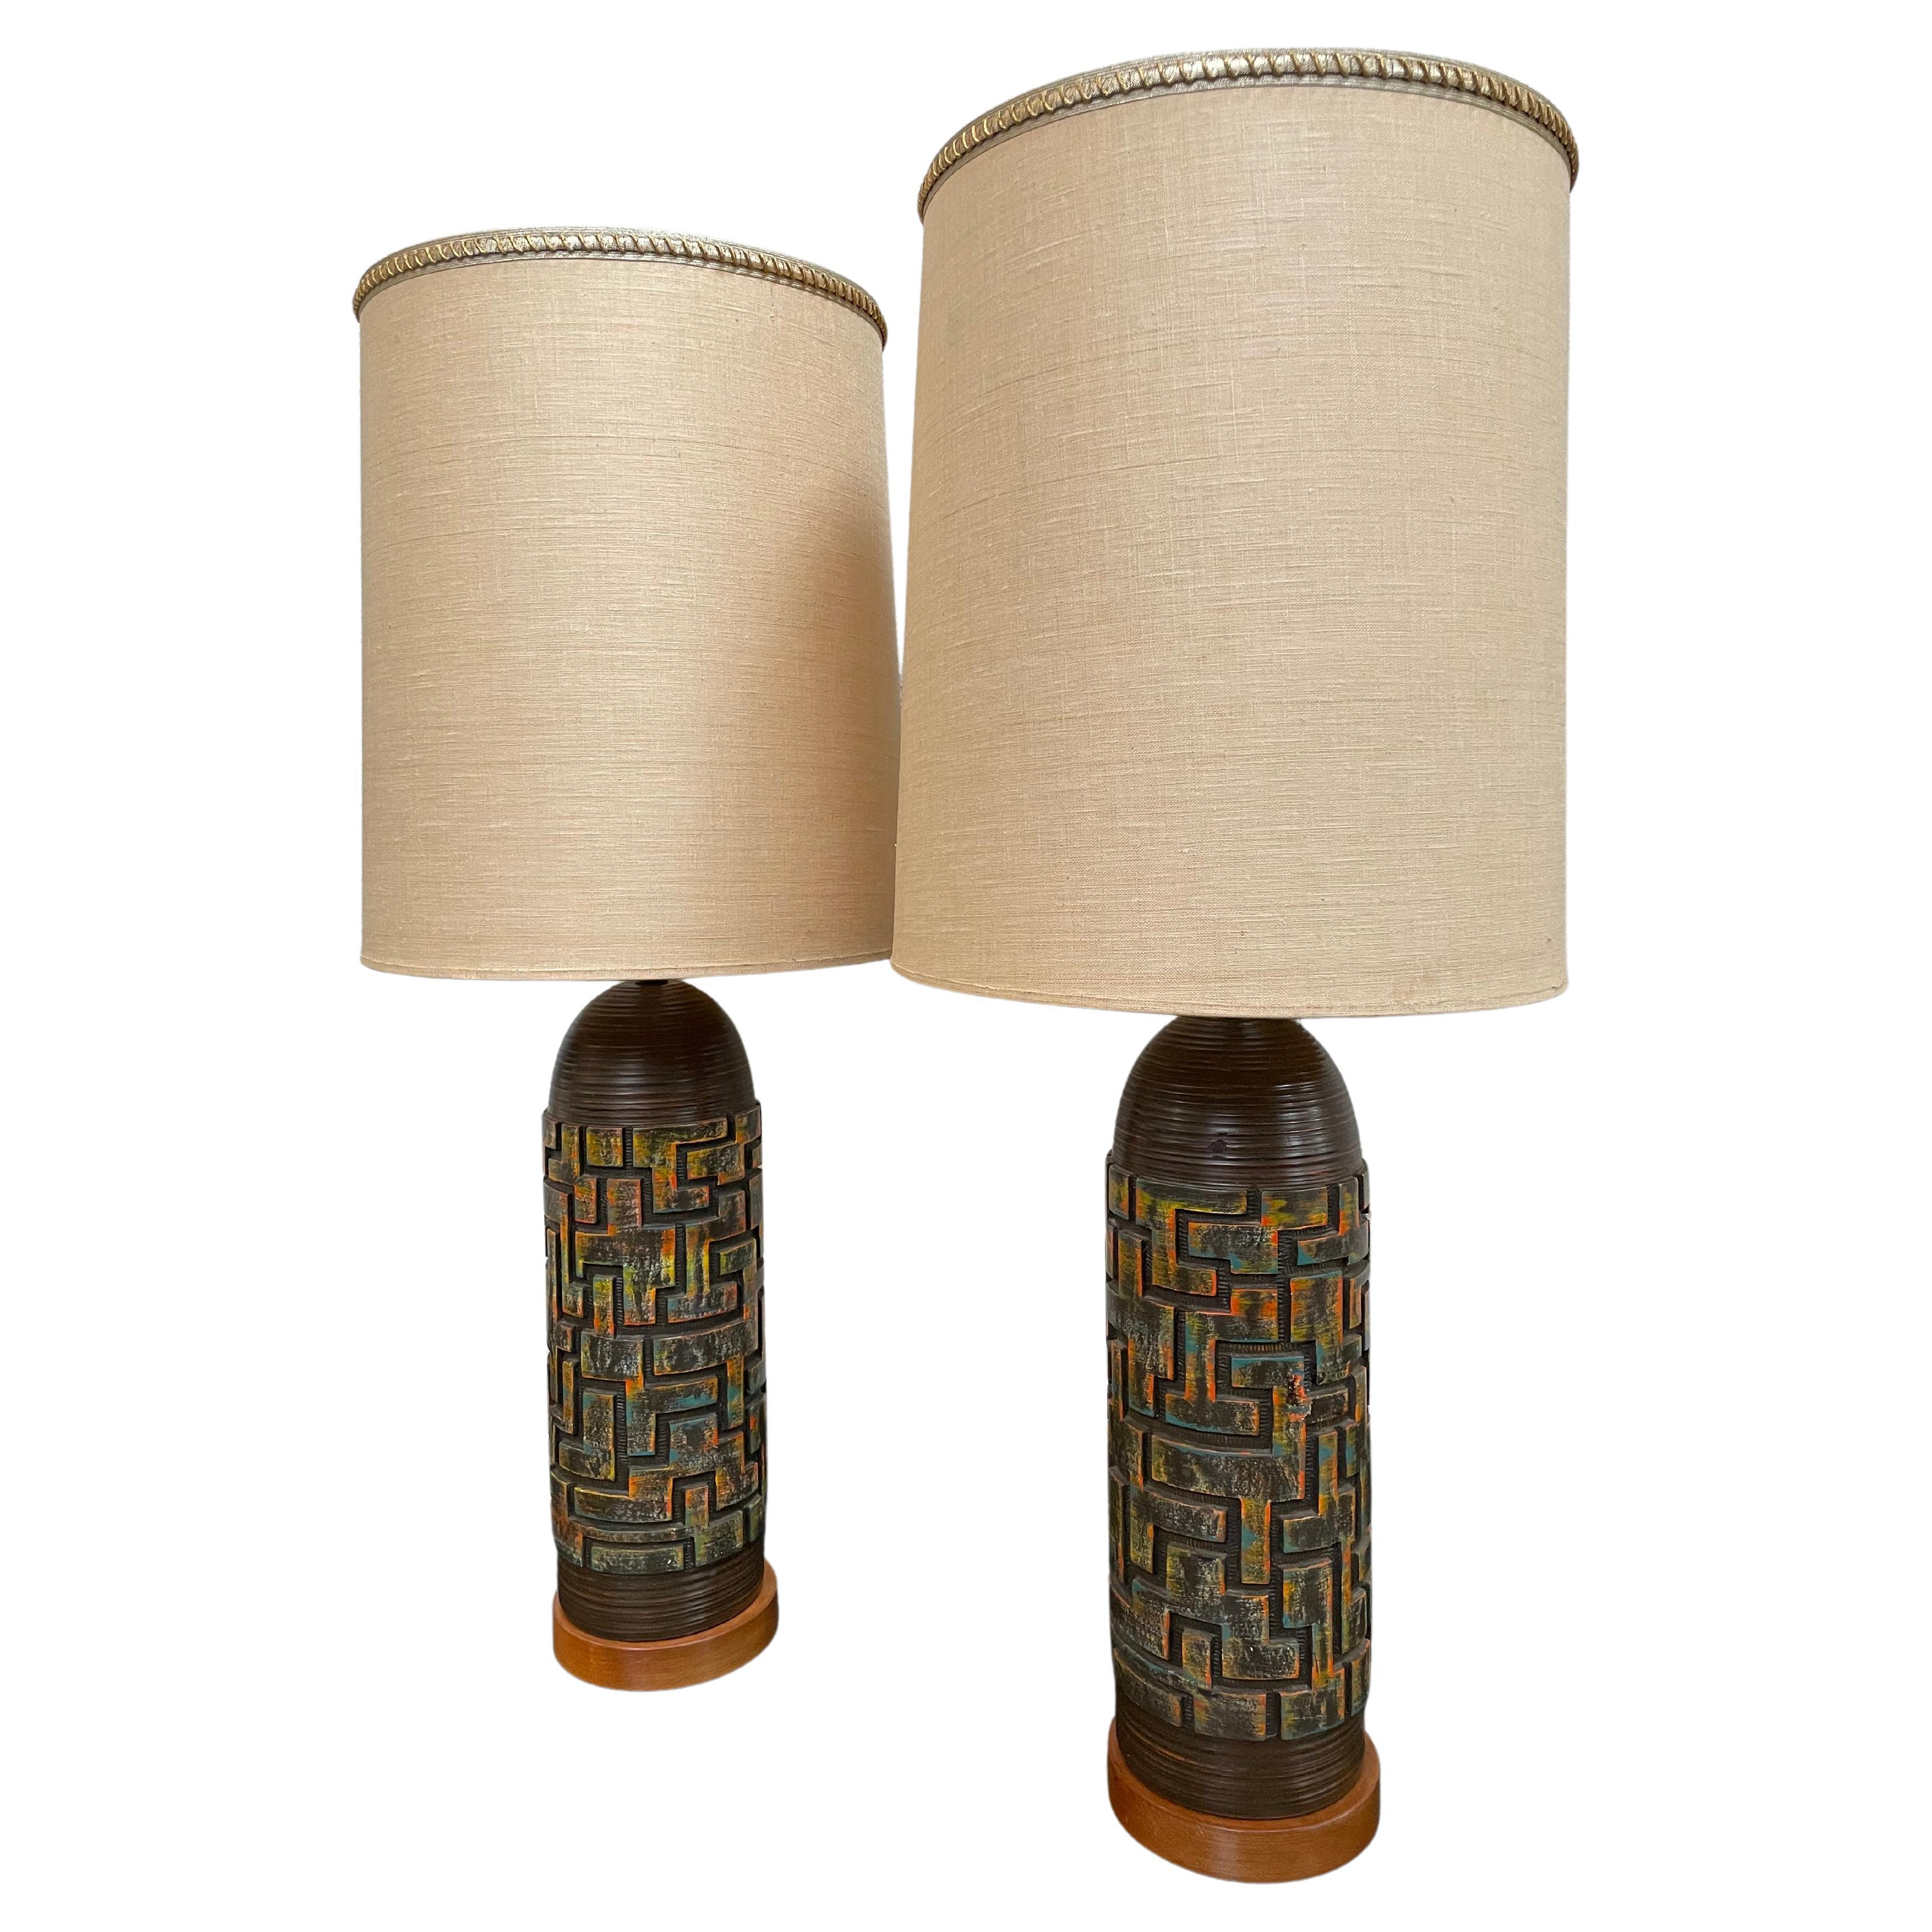 Mid-Century Modern Ceramic and Wood Lamps, a Pair For Sale